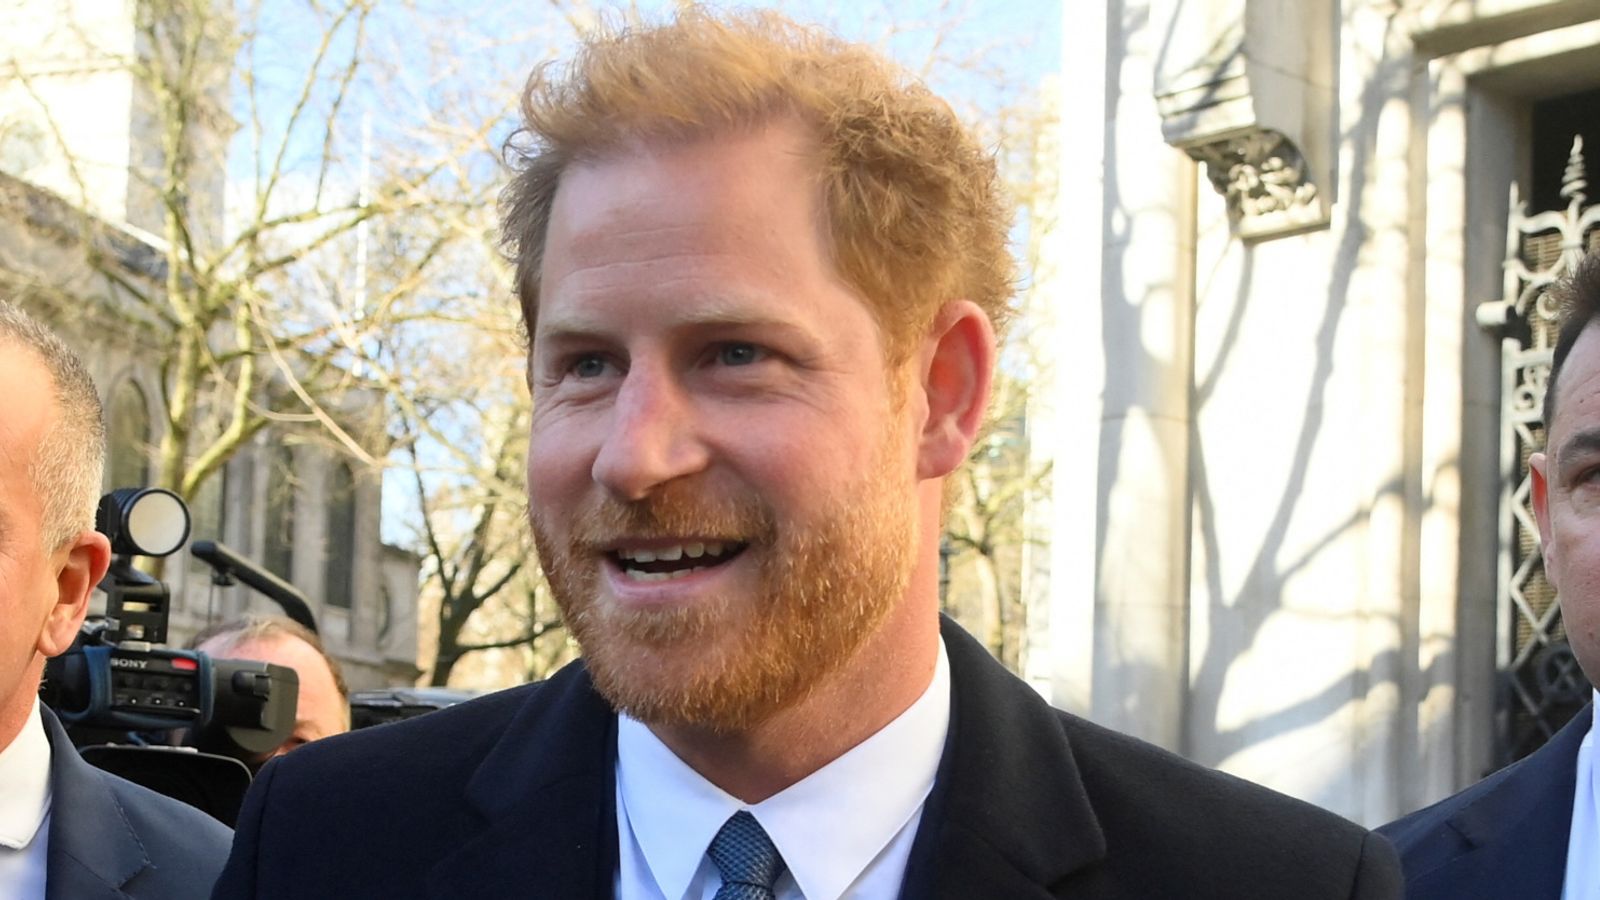 Prince Harry sat just three seats away from reporters as he sent a message with unexpected High Court visit